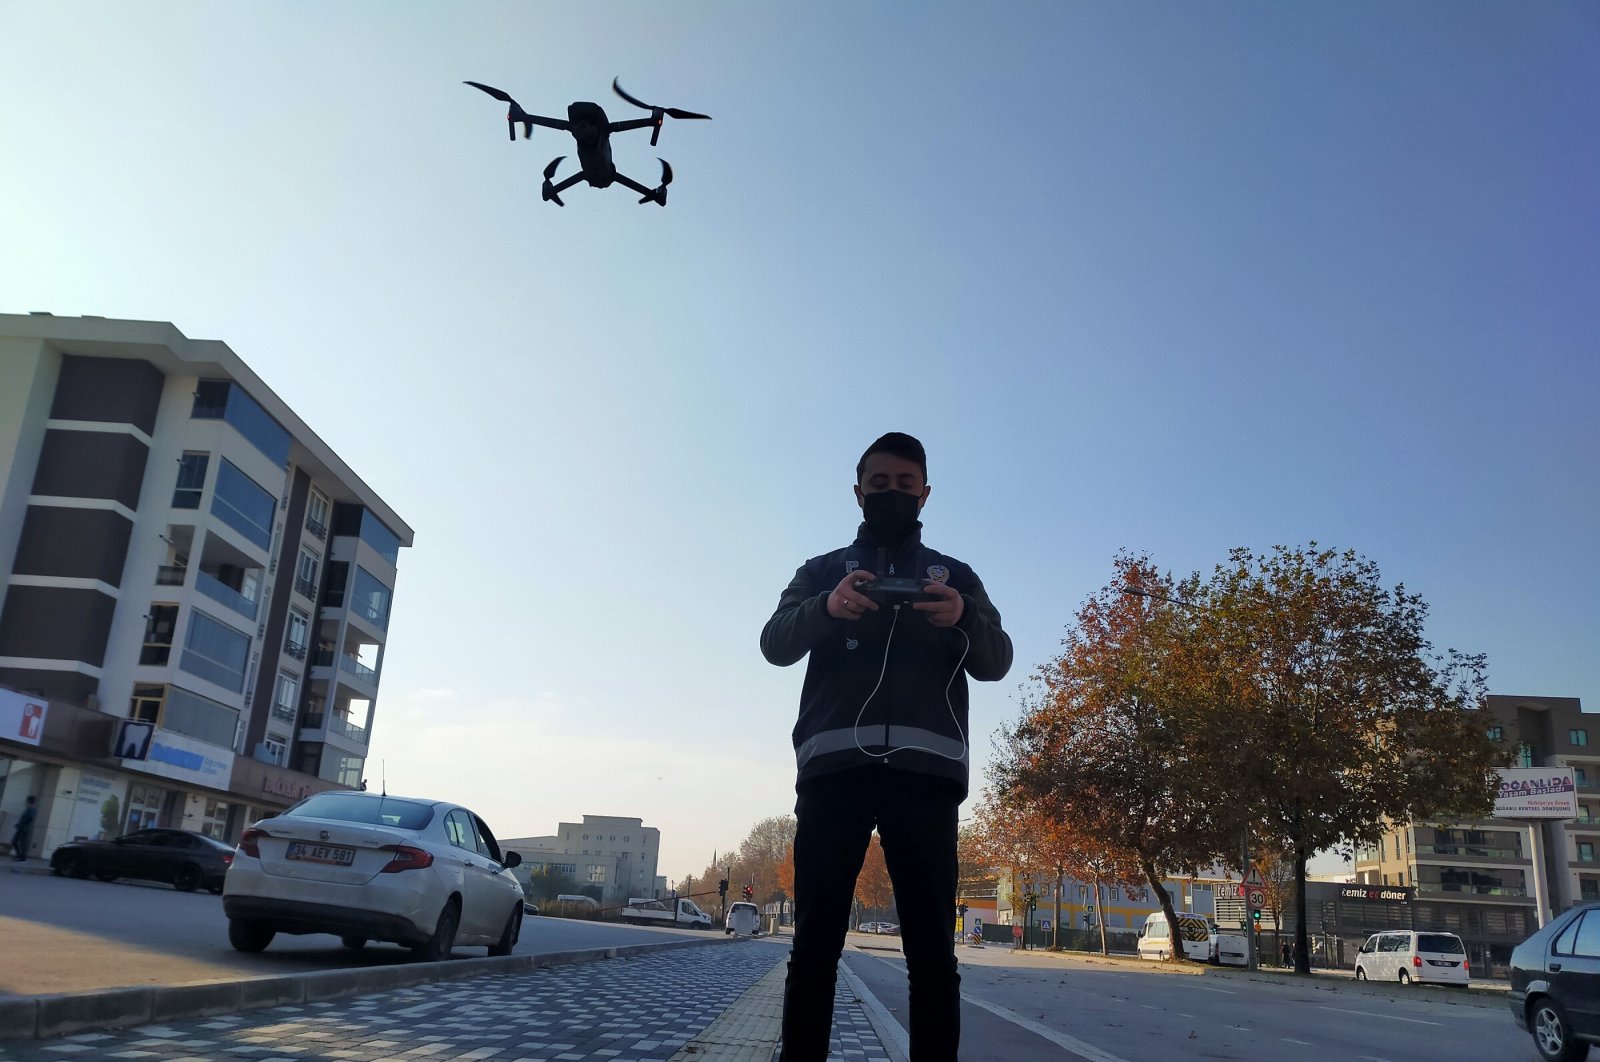 A police officer uses a drone to monitor a weekend curfew in Turkey's Bursa province on Dec. 6, 2020. (DHA Photo)